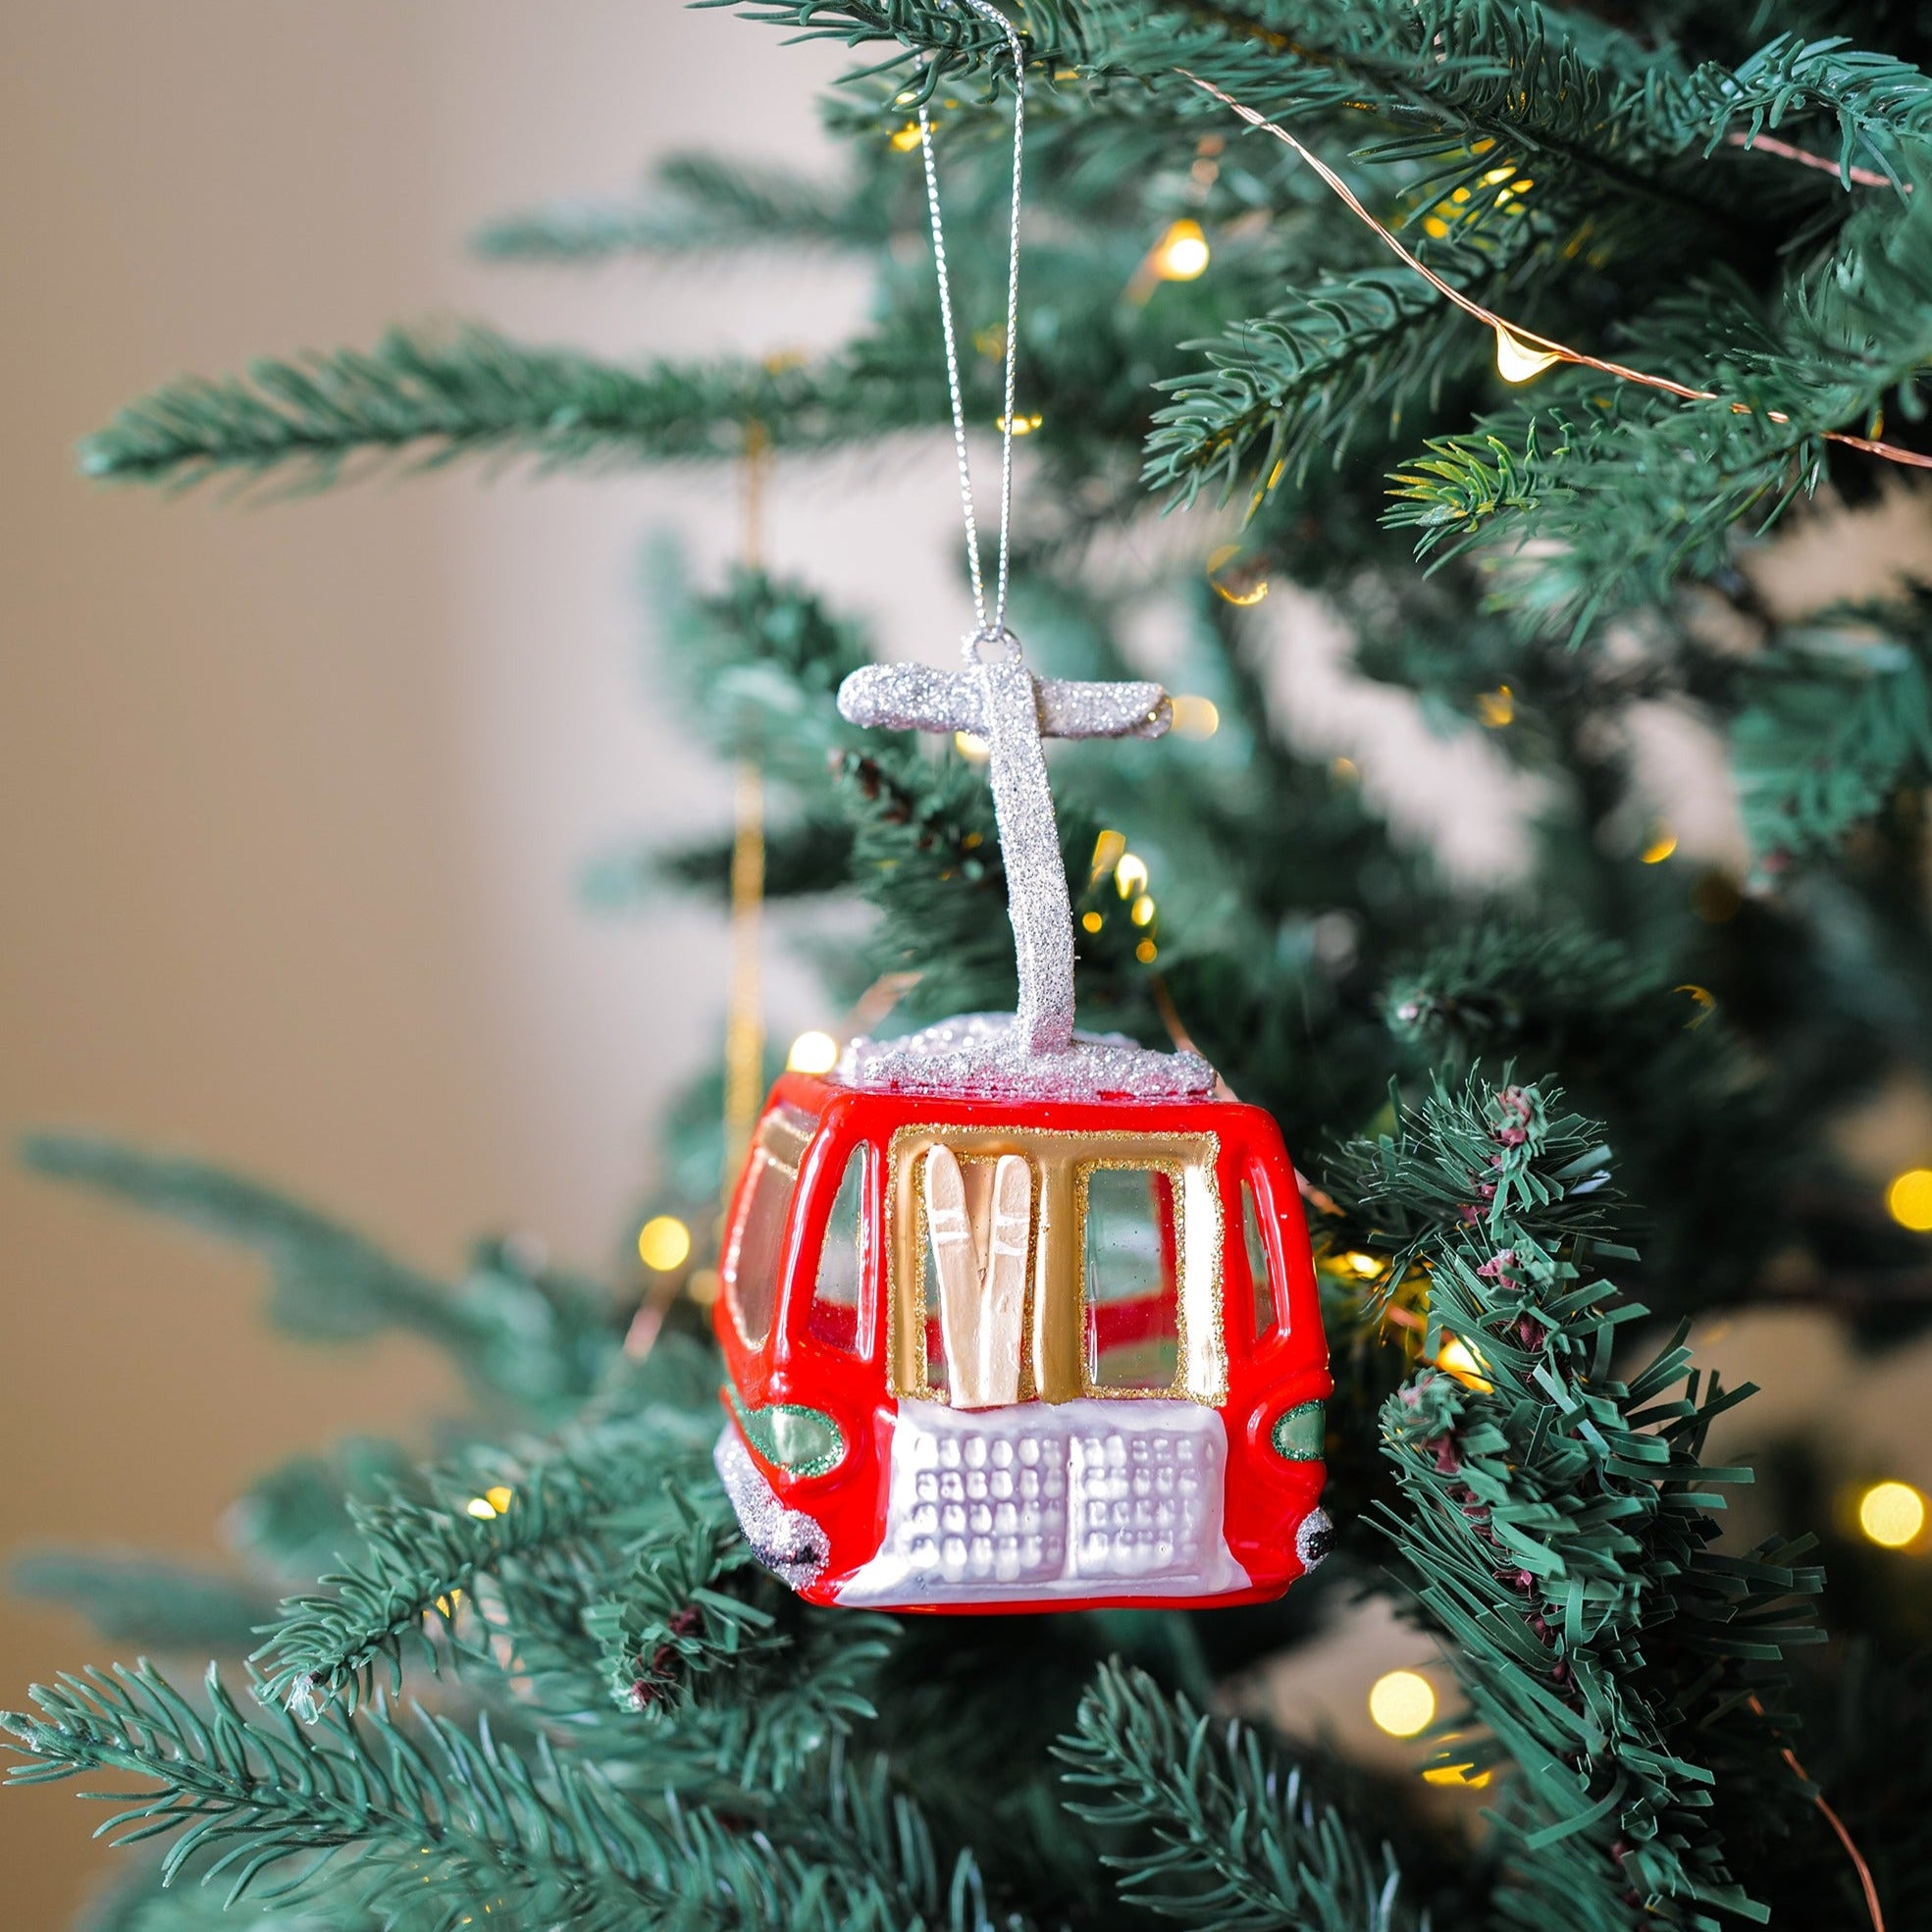 Made these fun chair lift ski ornaments for Christmas!